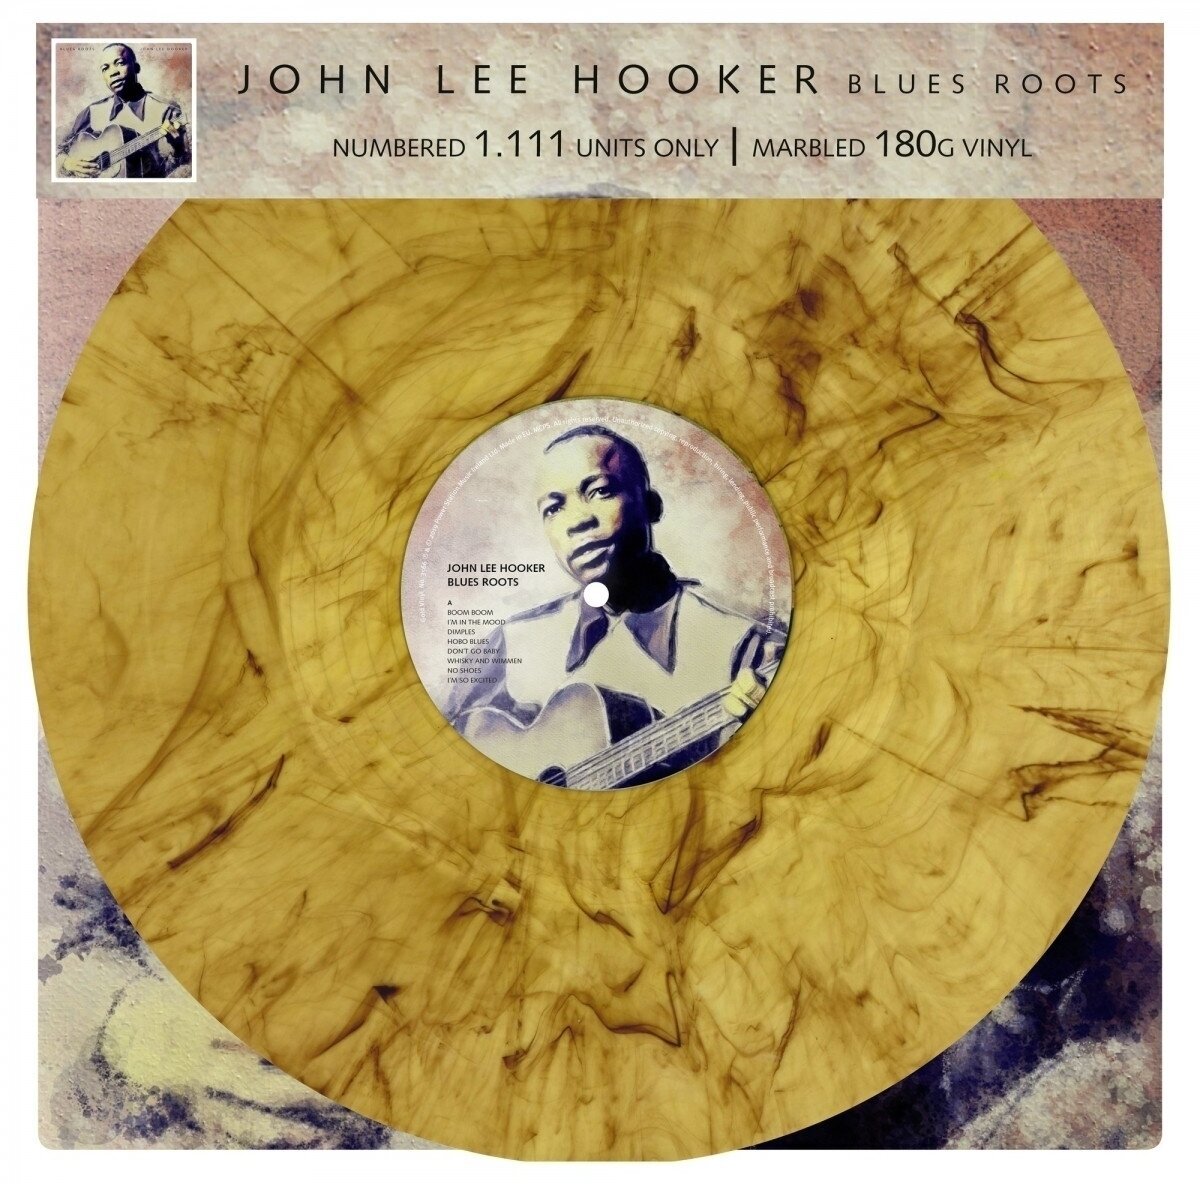 Vinyl Record John Lee Hooker - Blues Roots (Limited Edition) (Numbered) (Marbled Coloured) (LP)